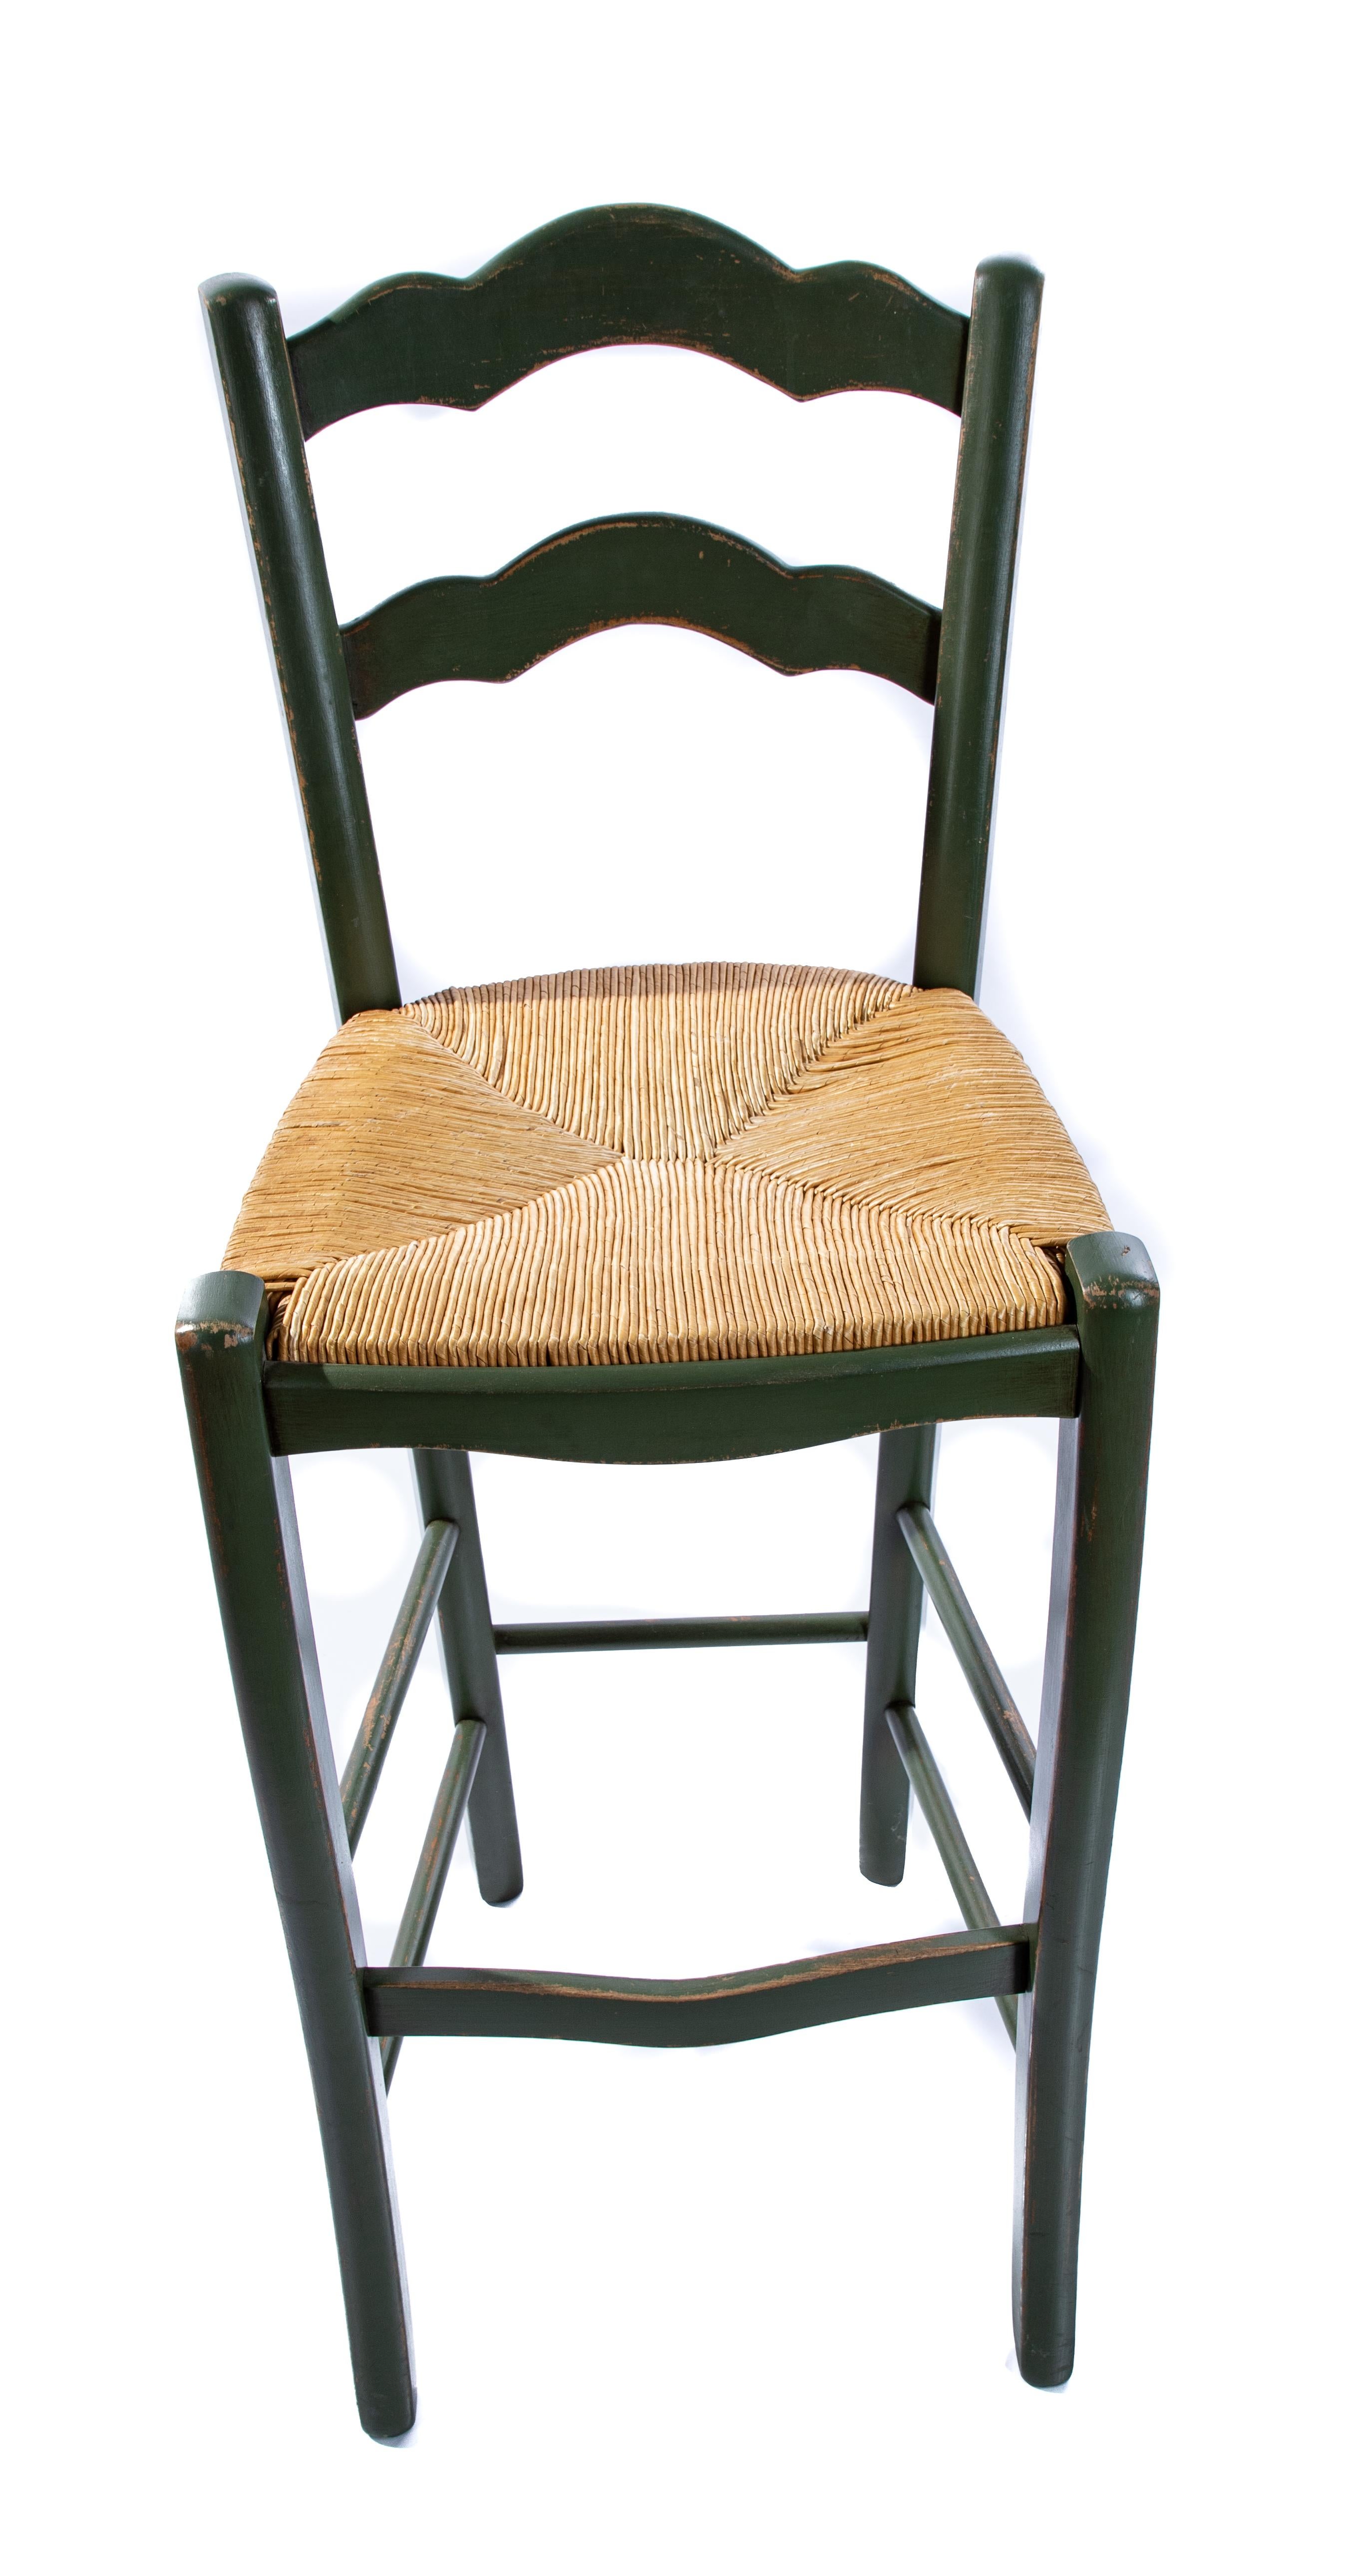 Italian Barstools with Plaid Seat Cushions In Good Condition For Sale In Cookeville, TN